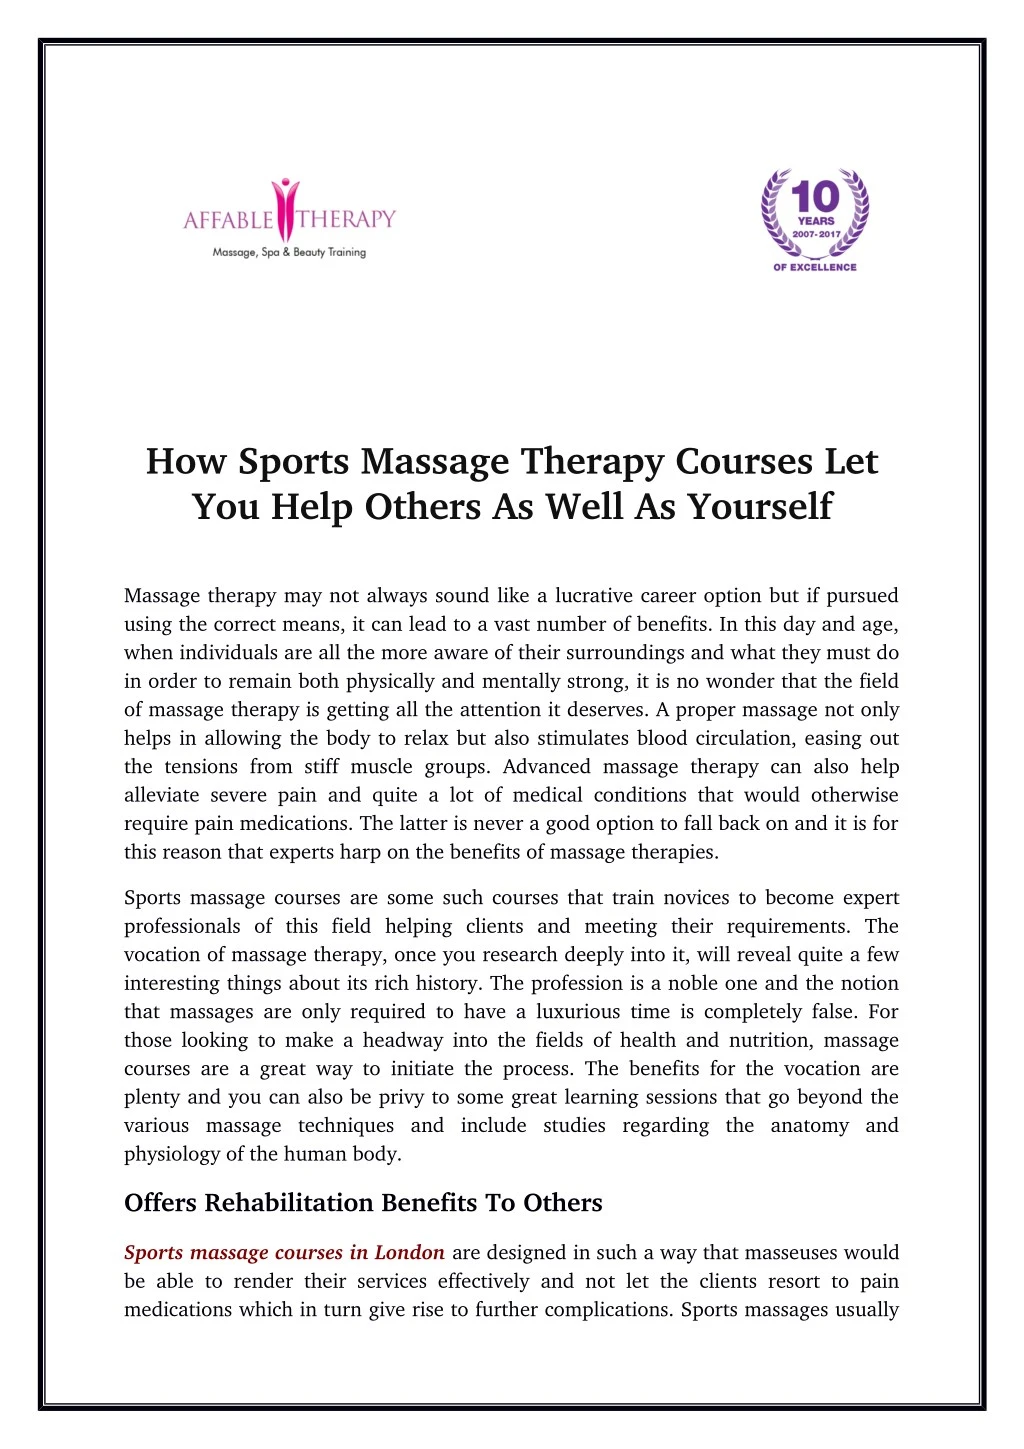 how sports massage therapy courses let you help